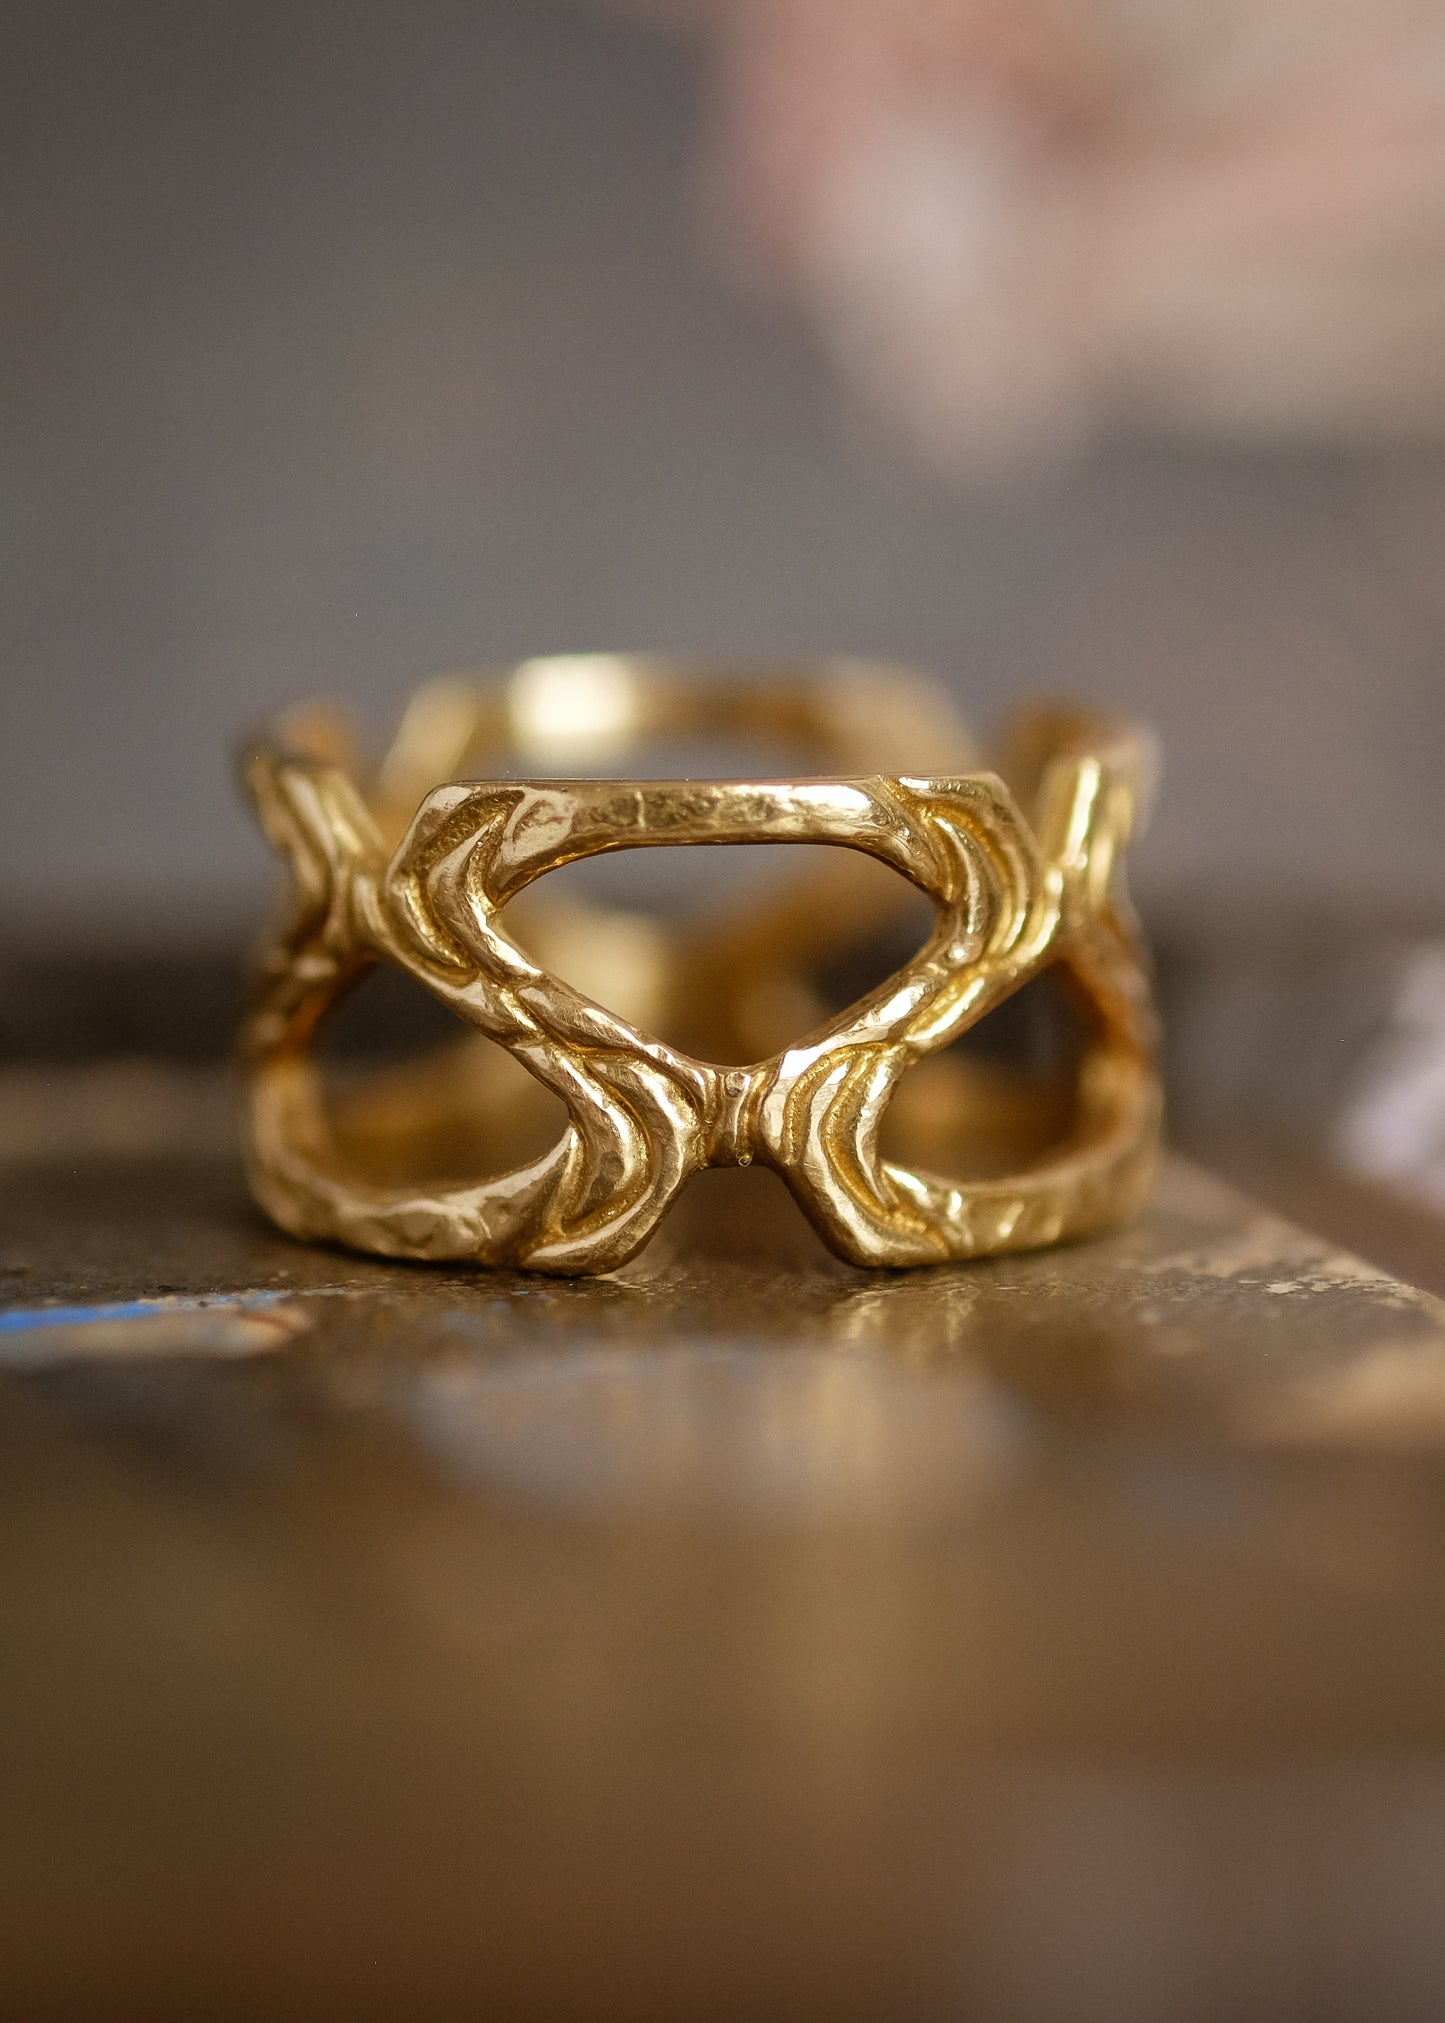 Conjuring the haunted cobblestone streets of the historic town for which it is named, the Salem ring weaves open spaces with textured gold to create a wide band for everyday wear—a bold and eye-catching piece of metalwork.